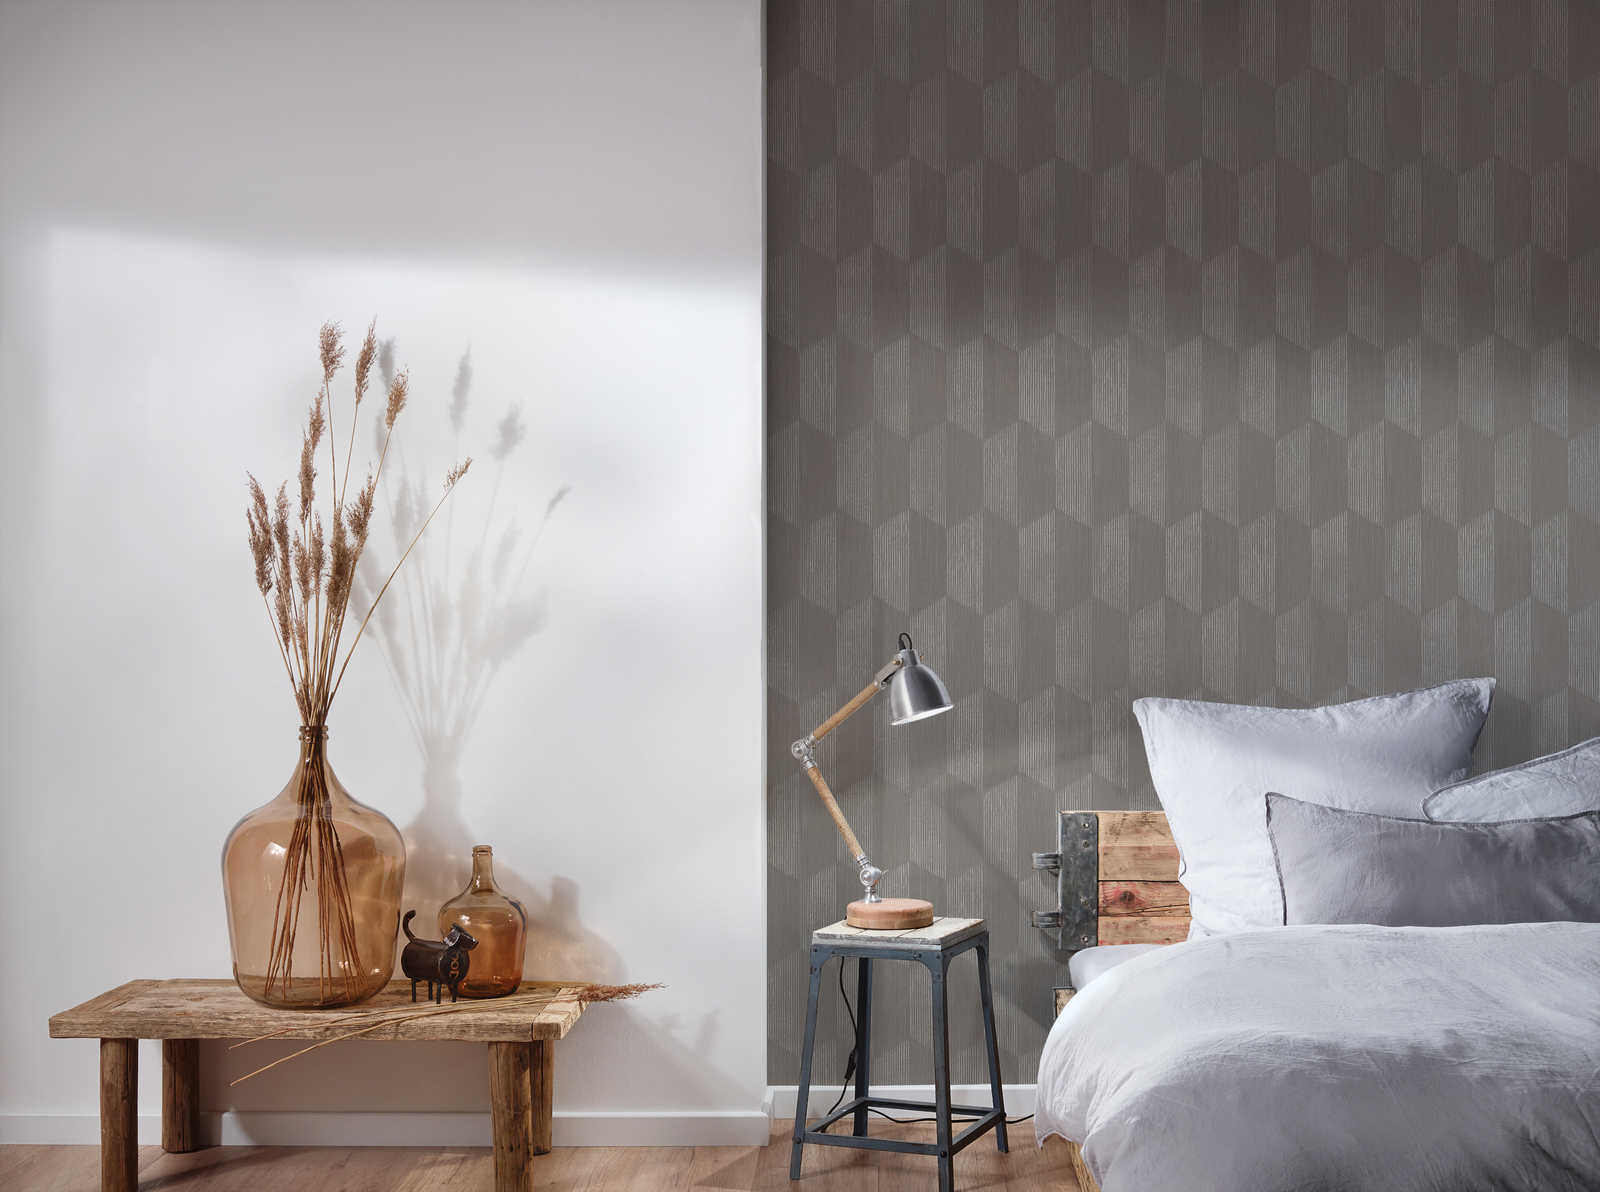             Textured wallpaper with 3D graphic pattern - grey, beige
        